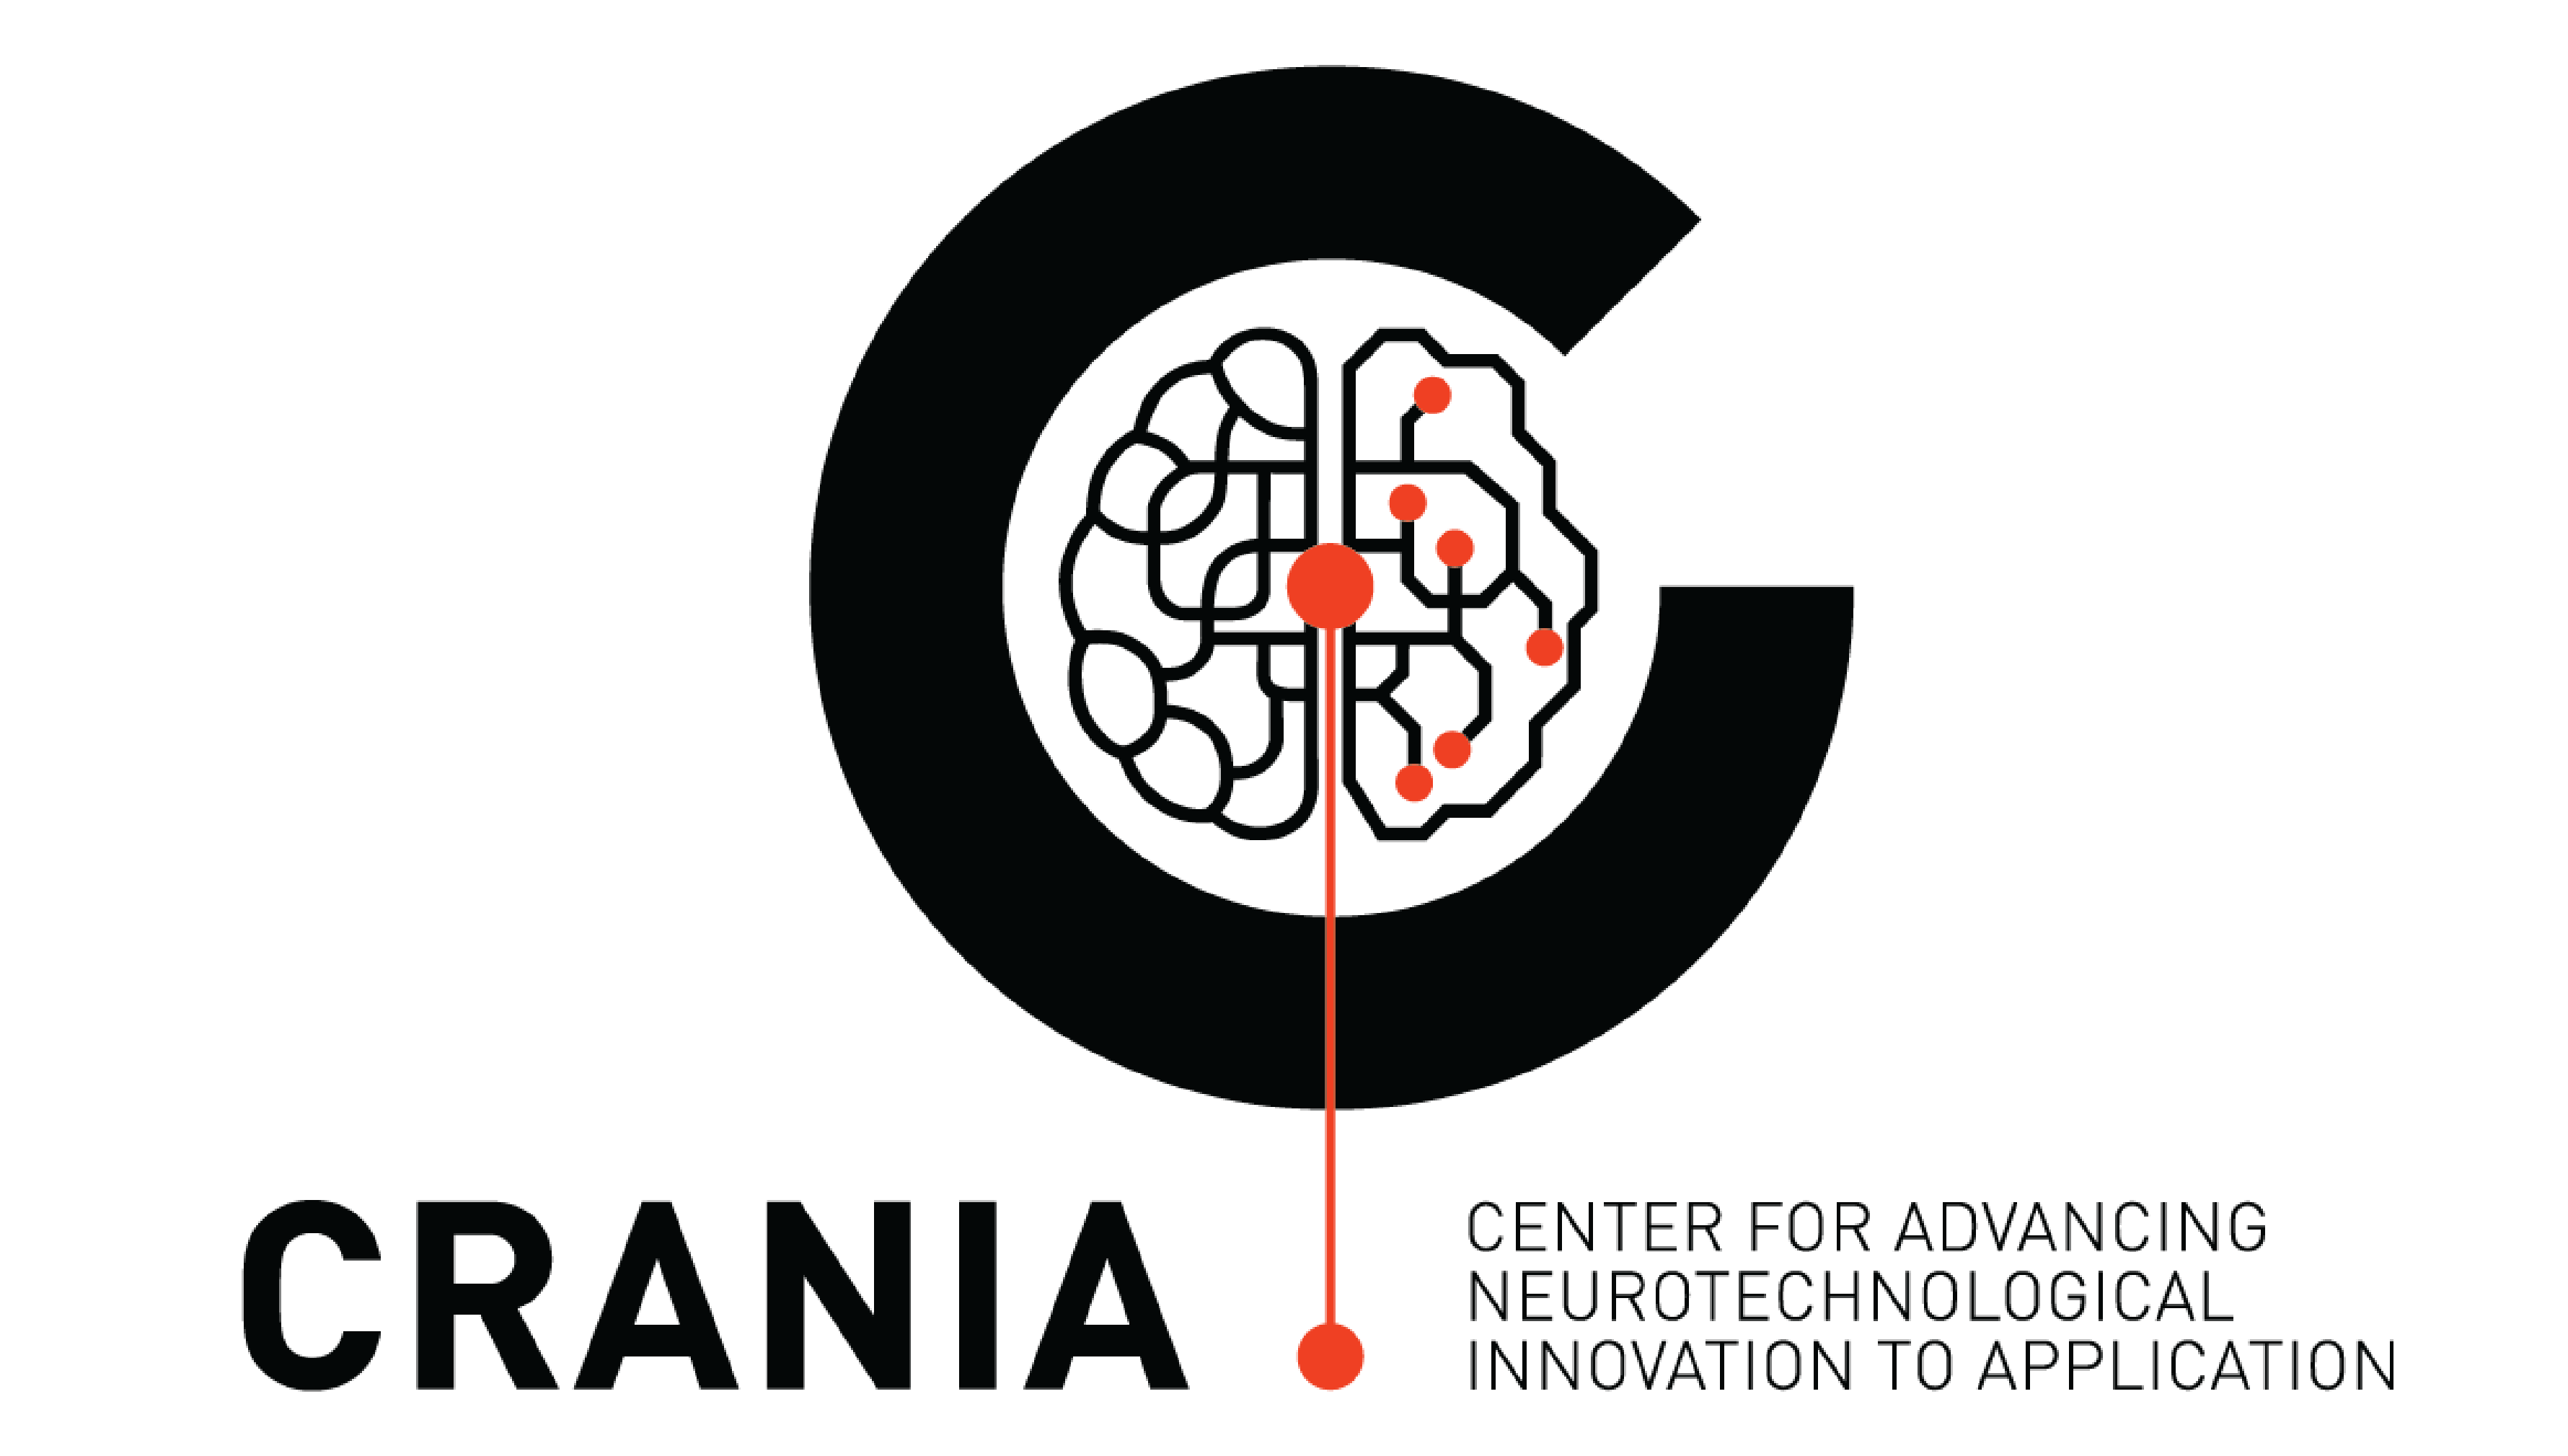 CRANIA - Center for Advancing Neurotechnological Innovation to Application